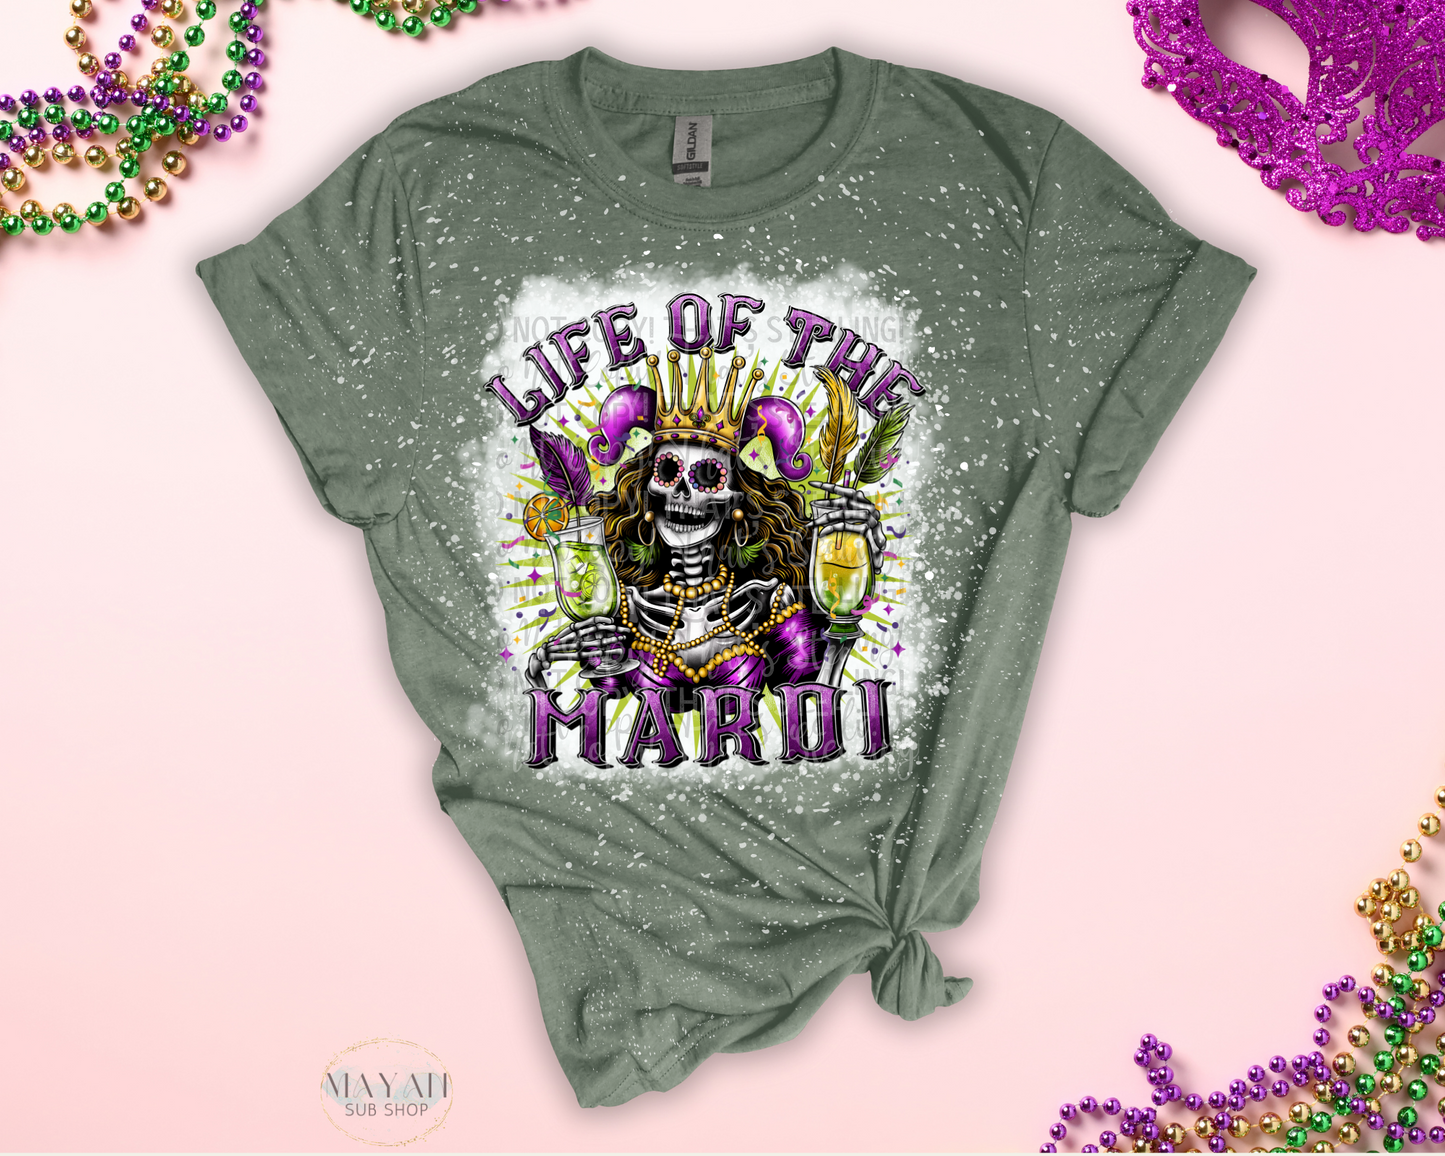 Life of the mardi in heather military green bleached shirt. -Mayan Sub Shop